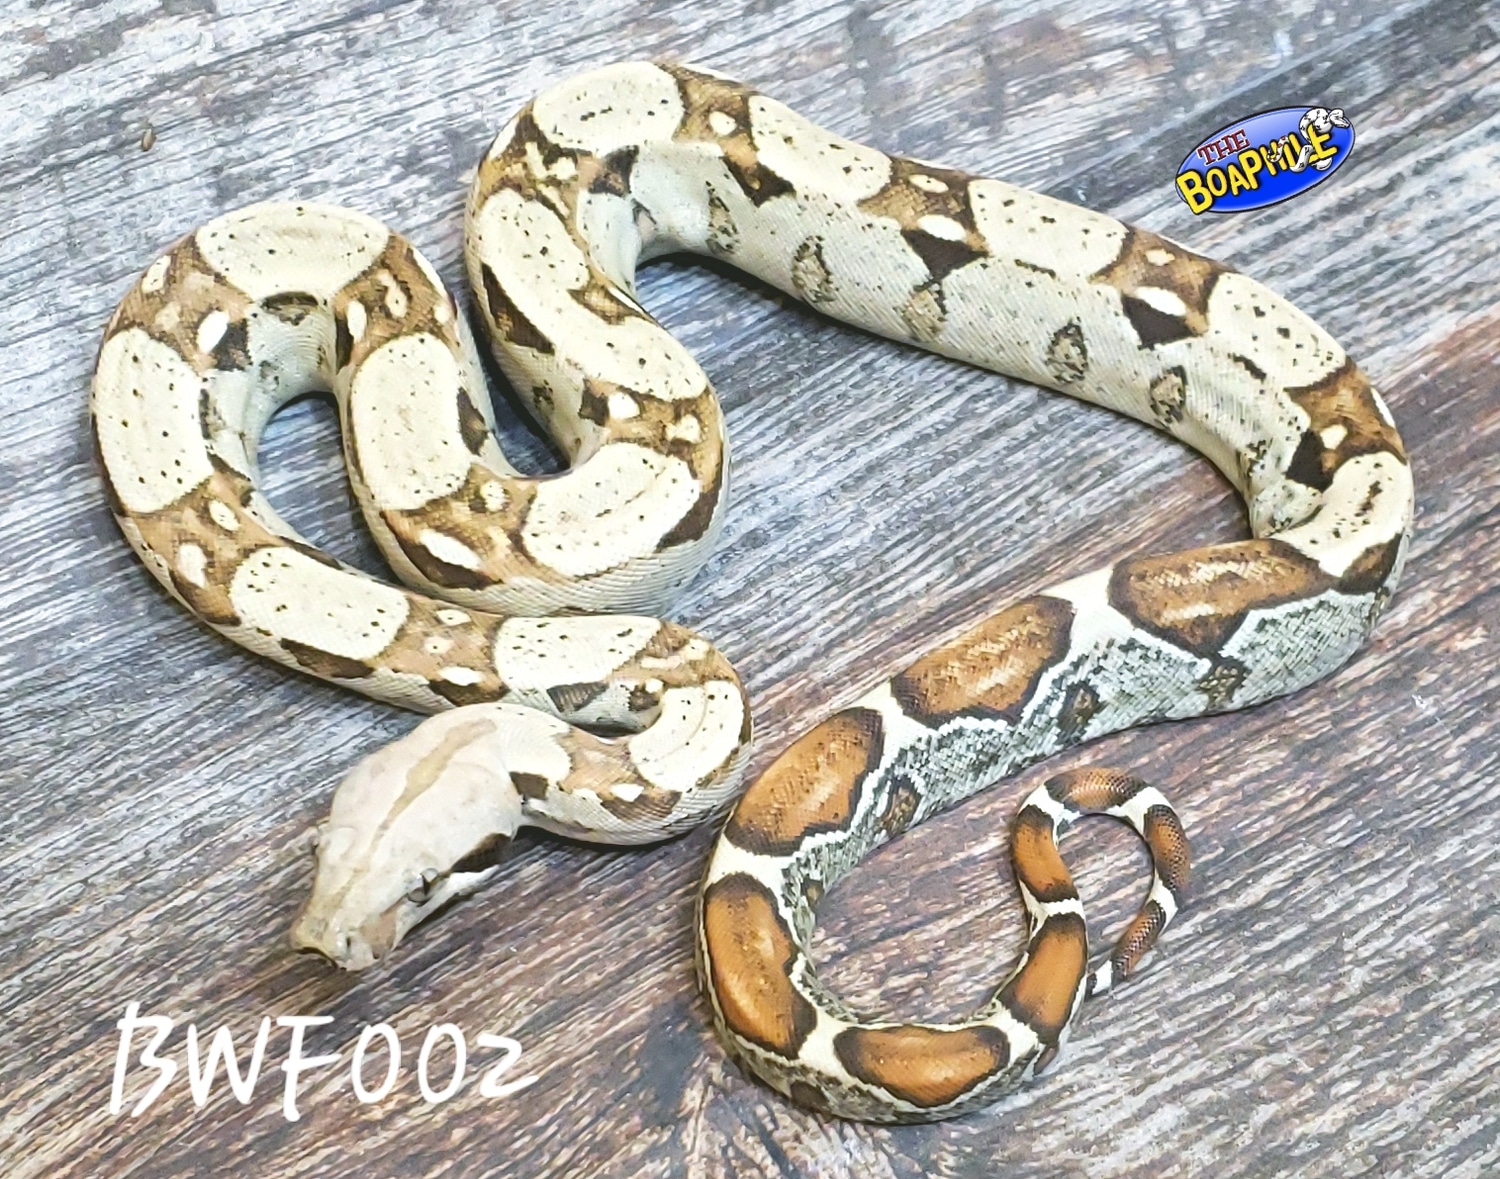 Bwc Bwf002 Boa Constrictor by Boaphile Jeff Ronne